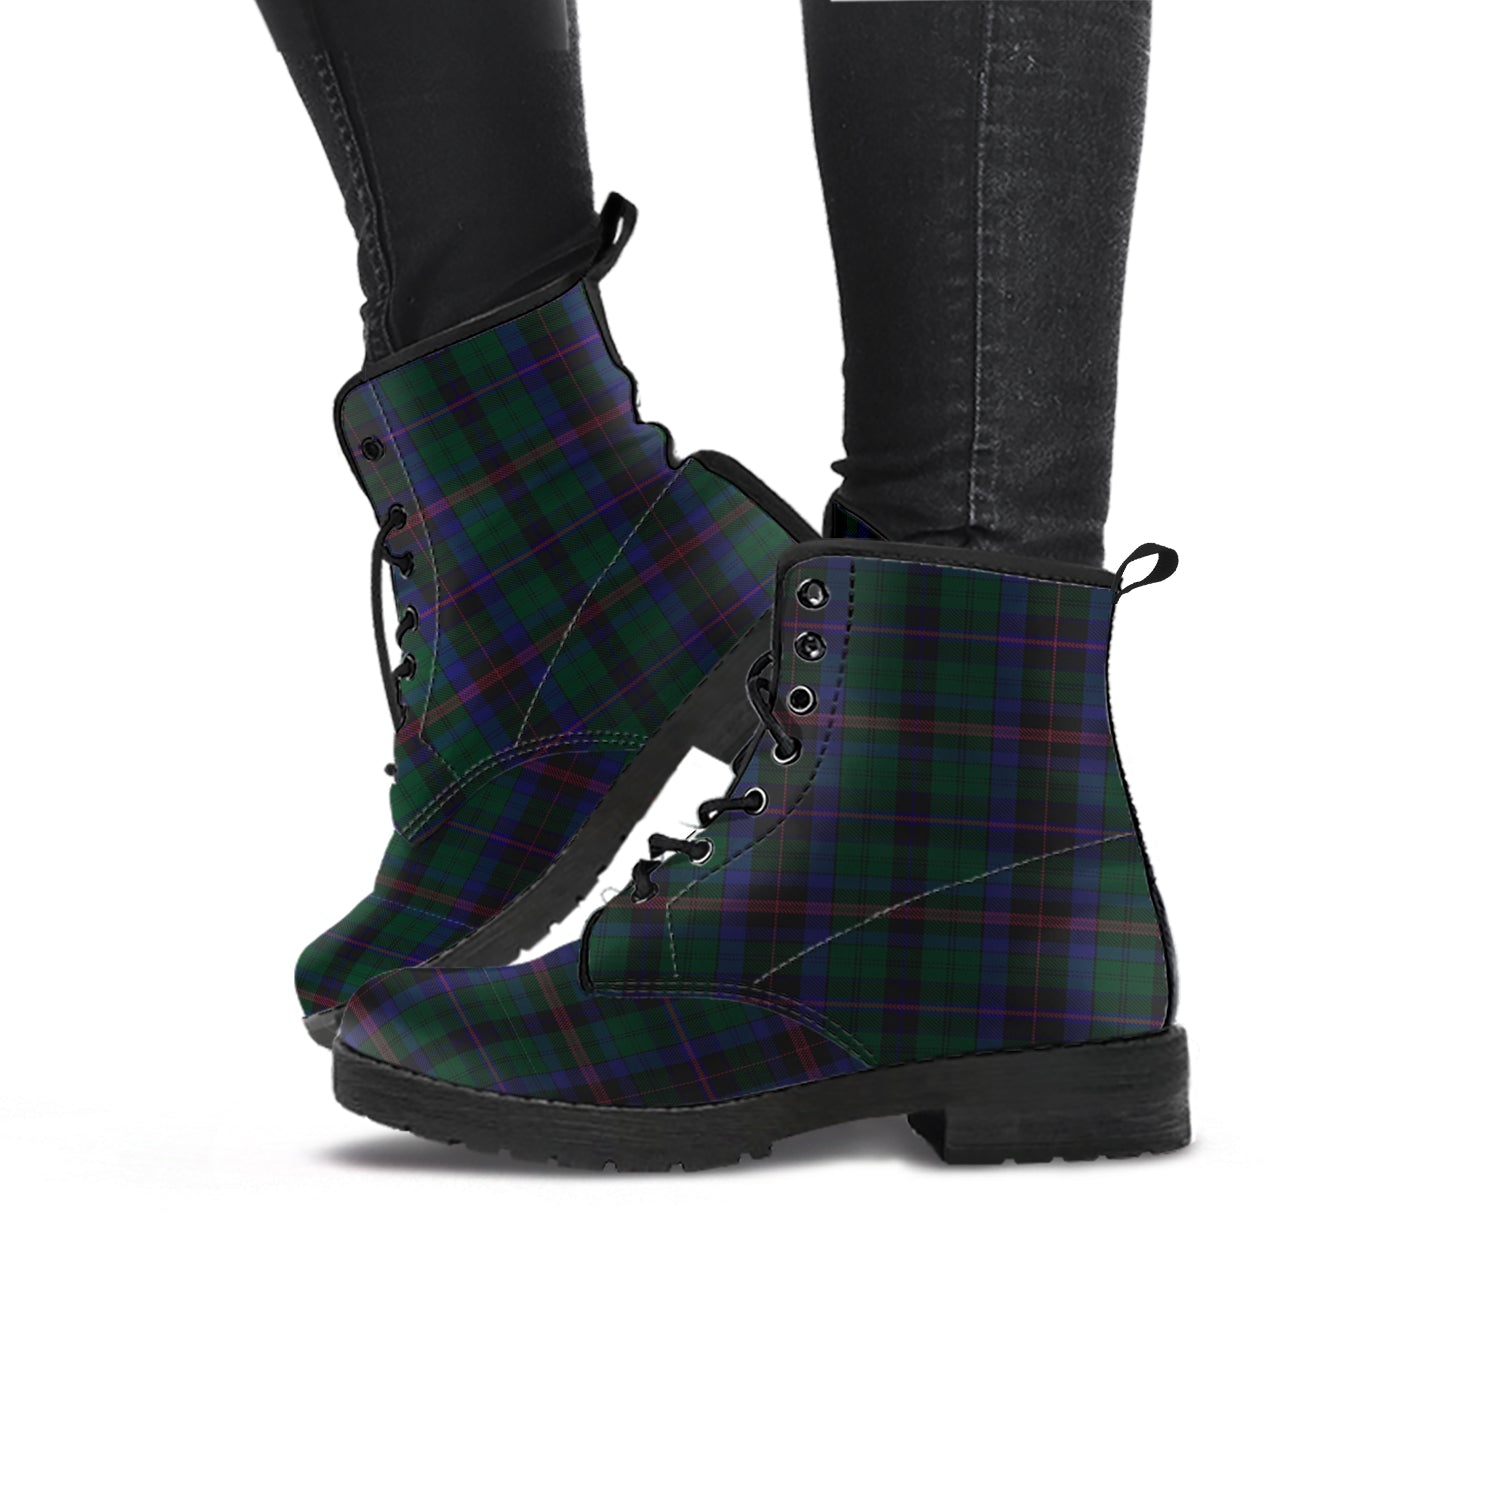 phillips-of-wales-tartan-leather-boots